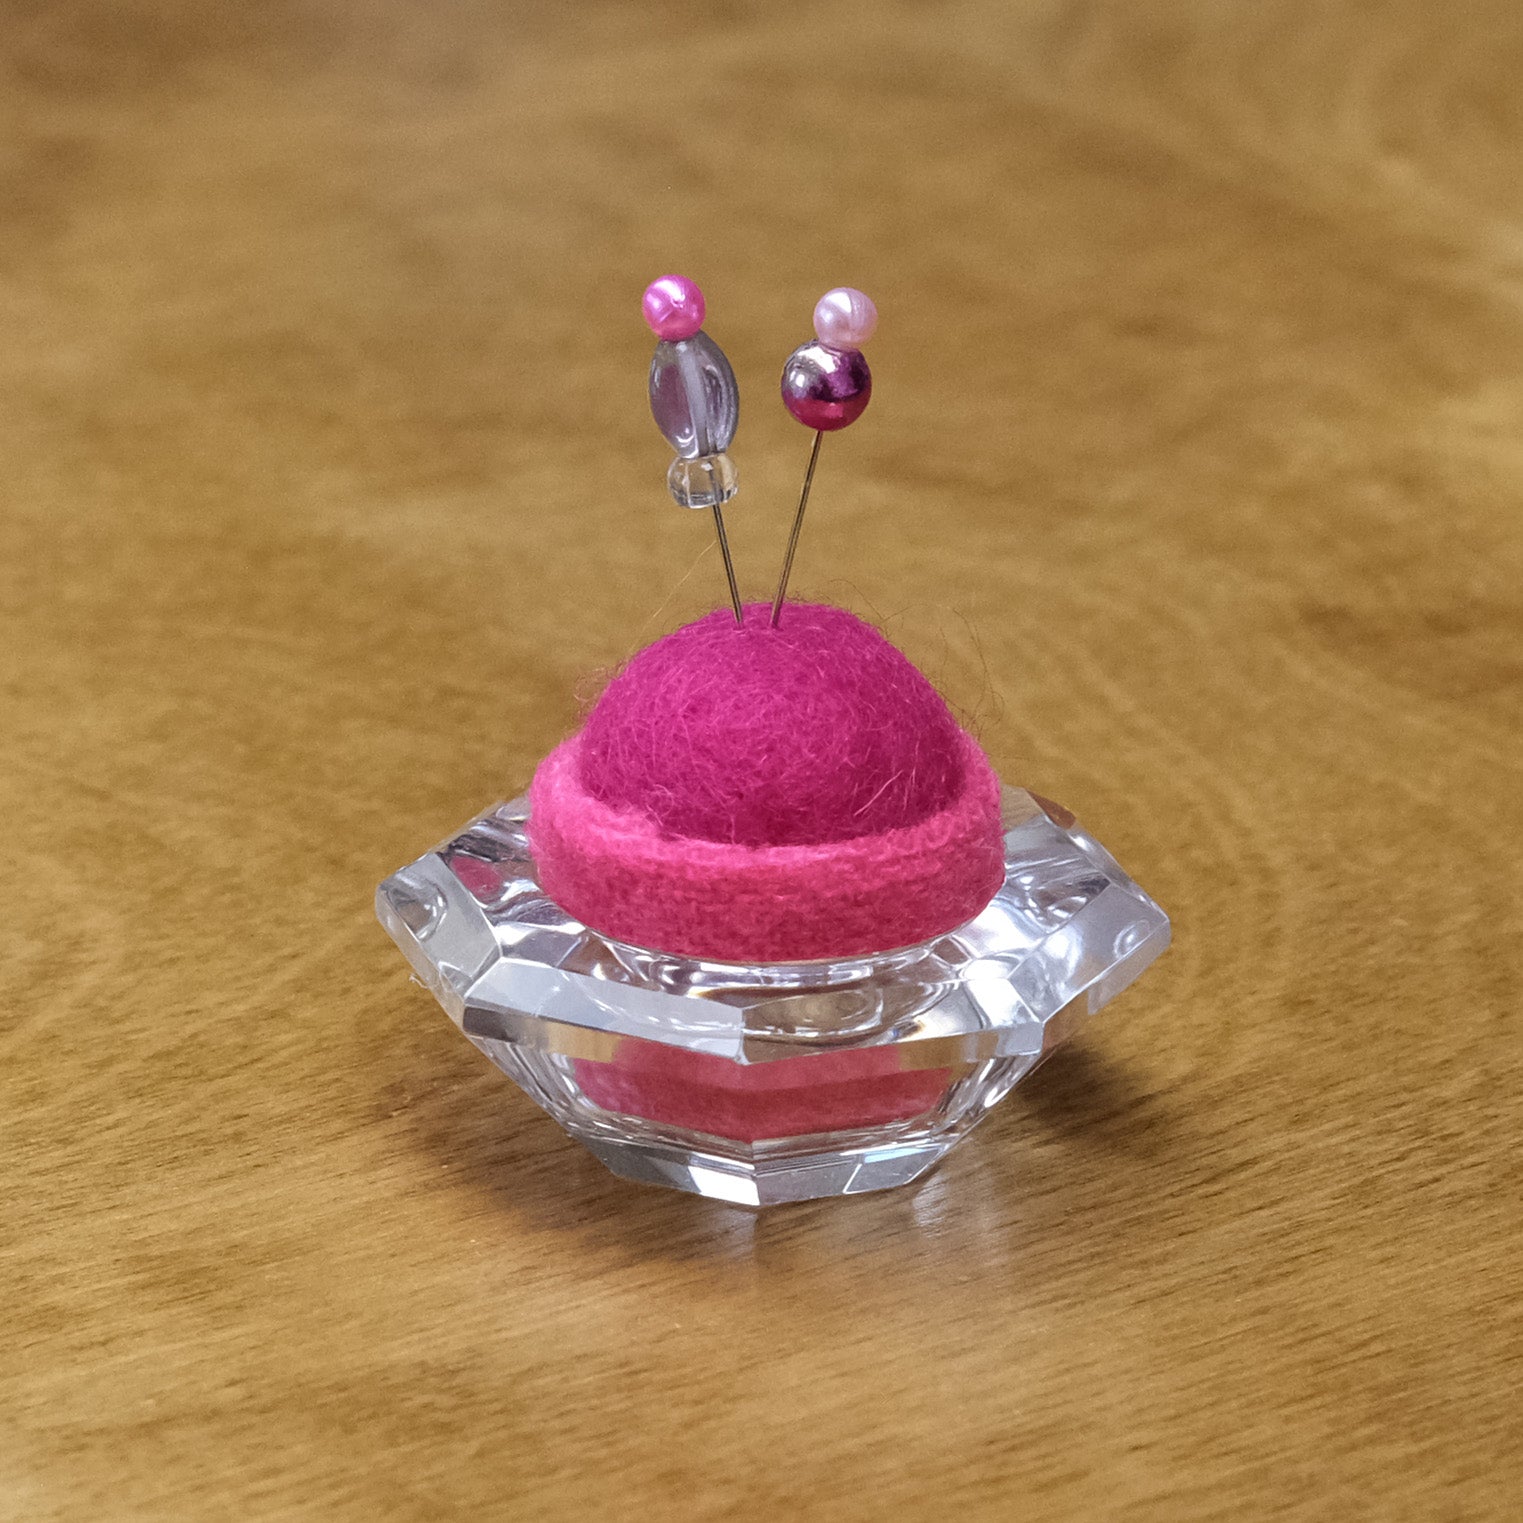 Vintage Pincushion - Glass with Pink Wool